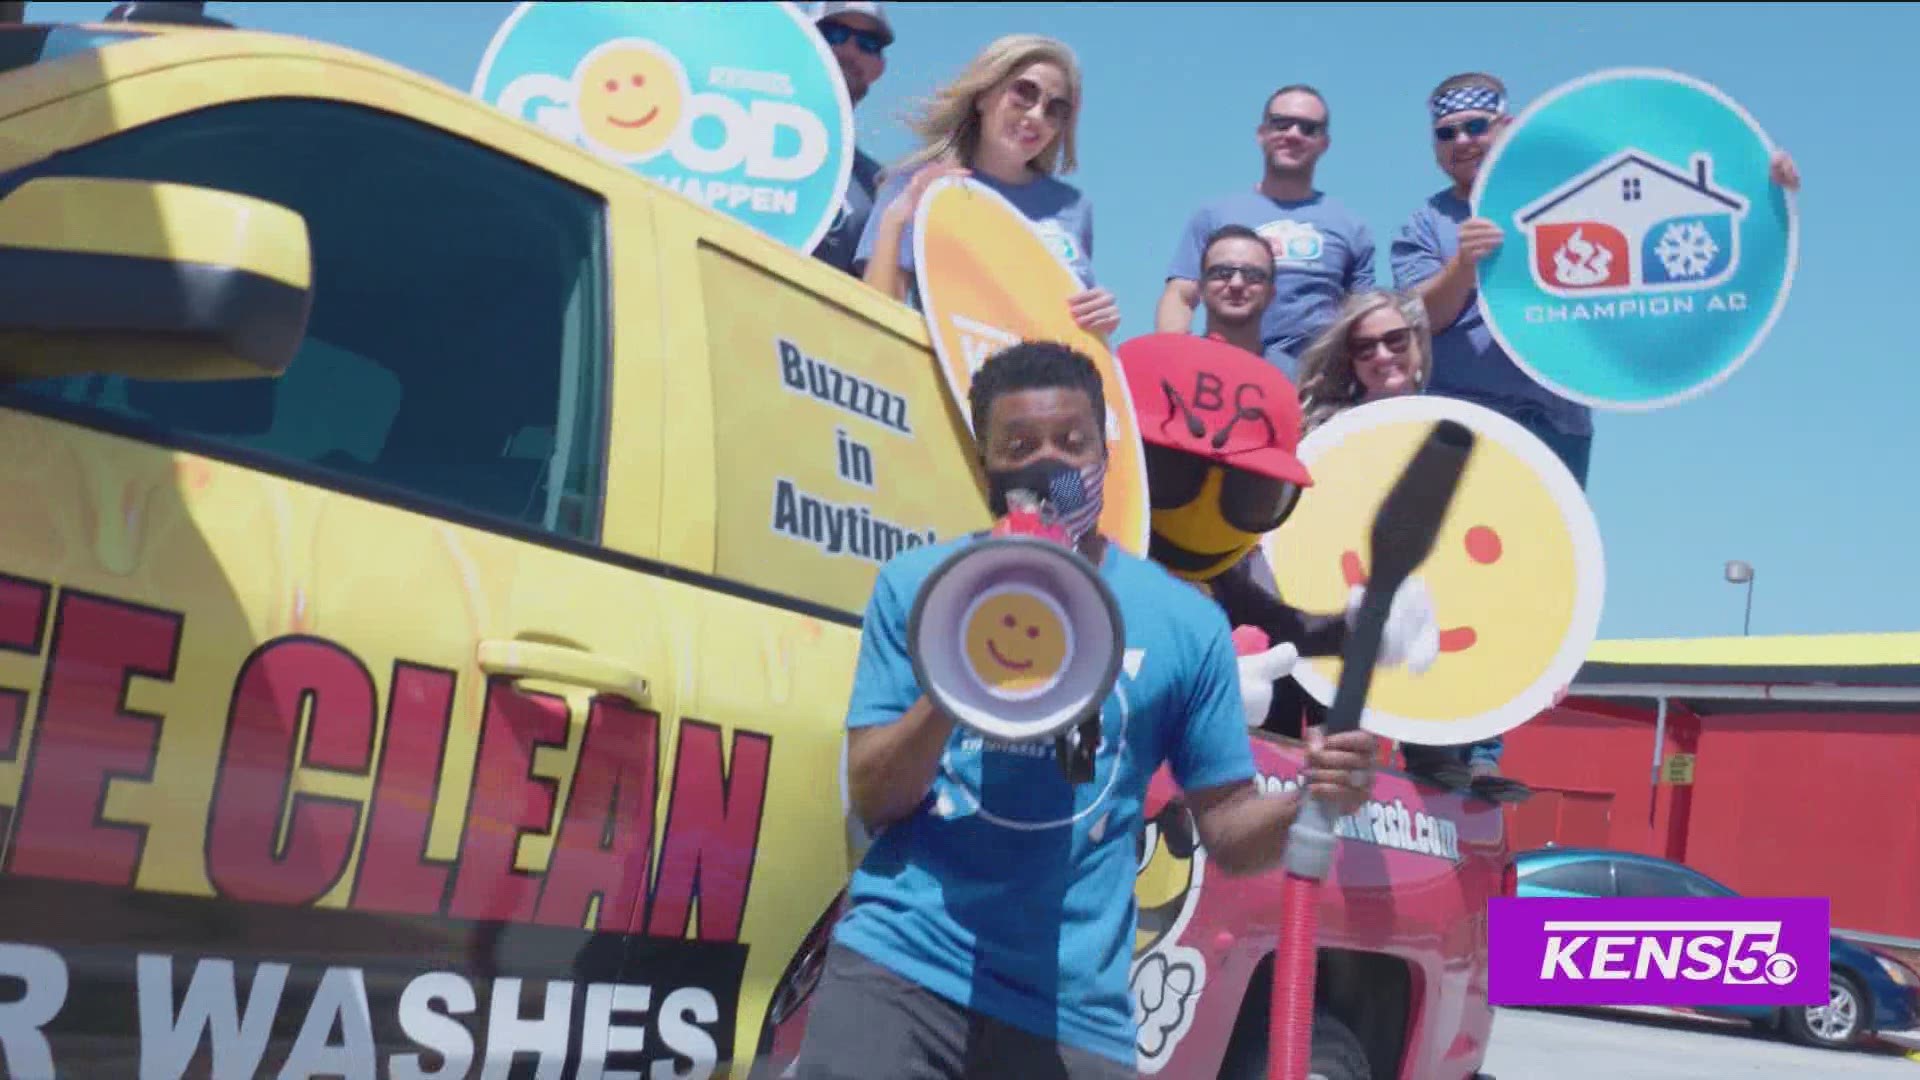 The Kindness Crew was feeling extra bubbly and decided to spread the love one car at a time. Check it out!